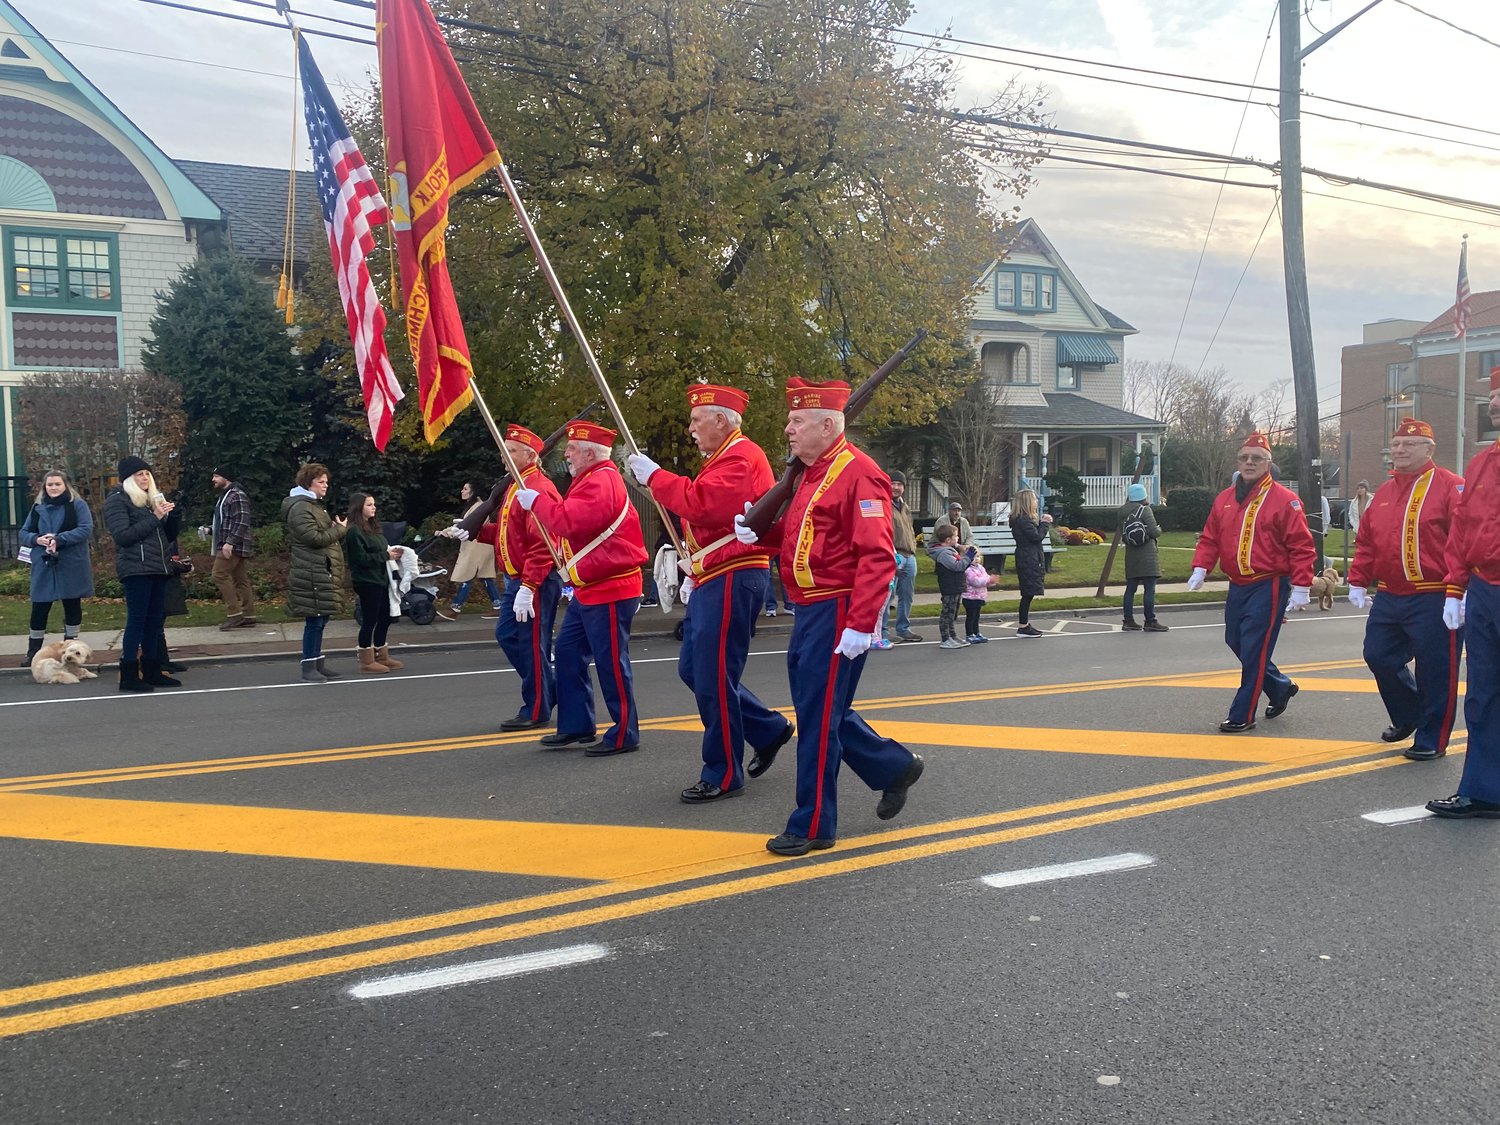 Veterans from the Marines march at the front of the parade.